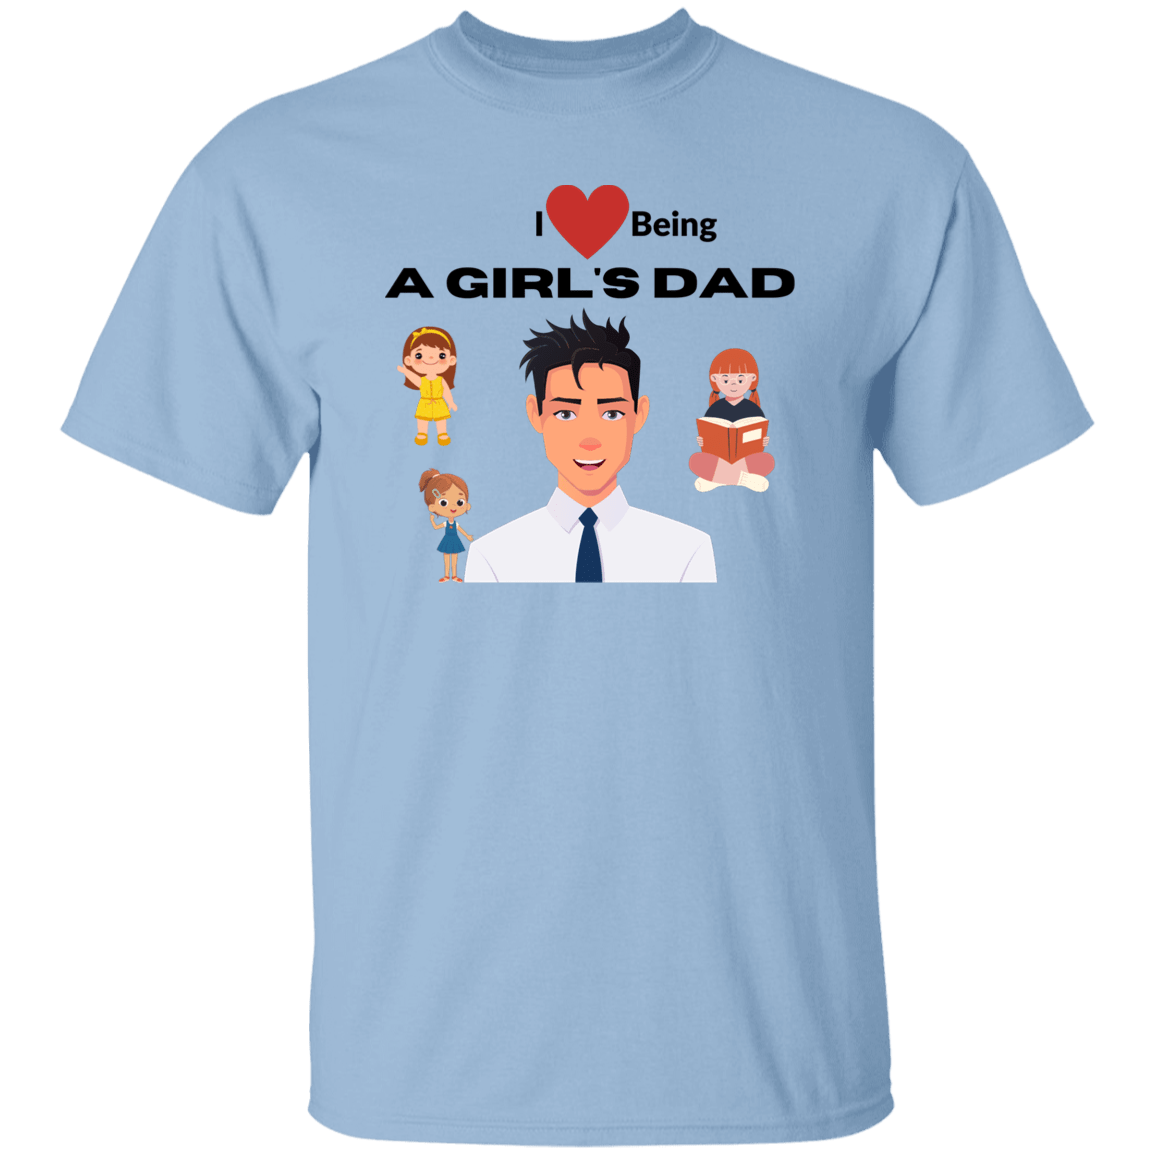 I Love being a Girl's Dad T-Shirt